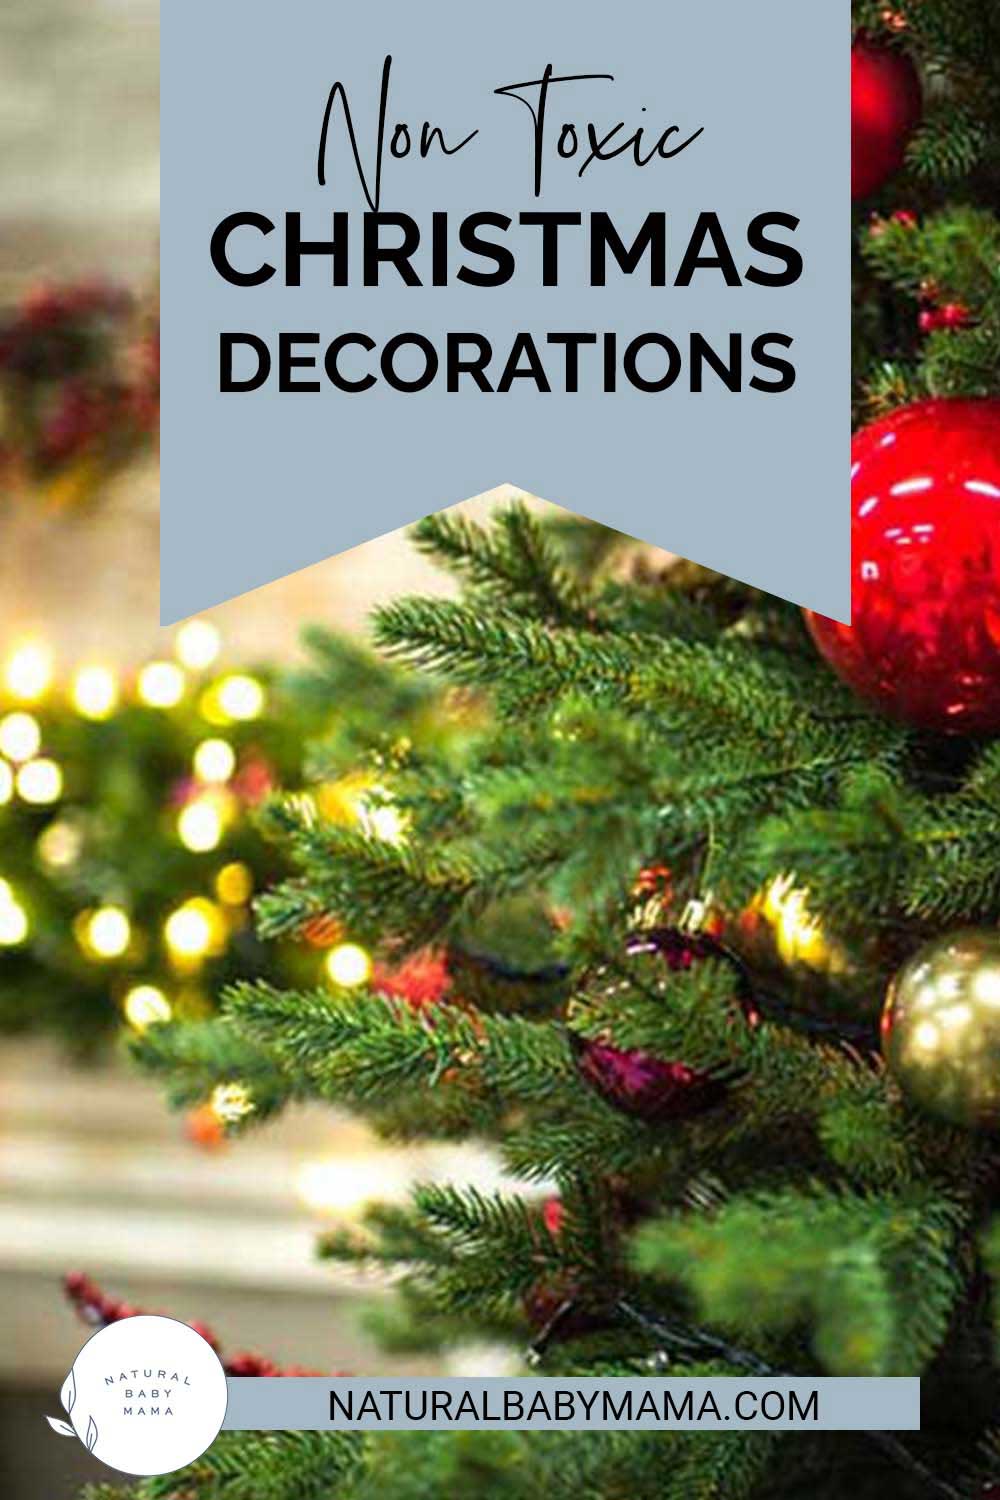 Non-Toxic Christmas Decorations & Lead Free Lights - Natural Baby Mama